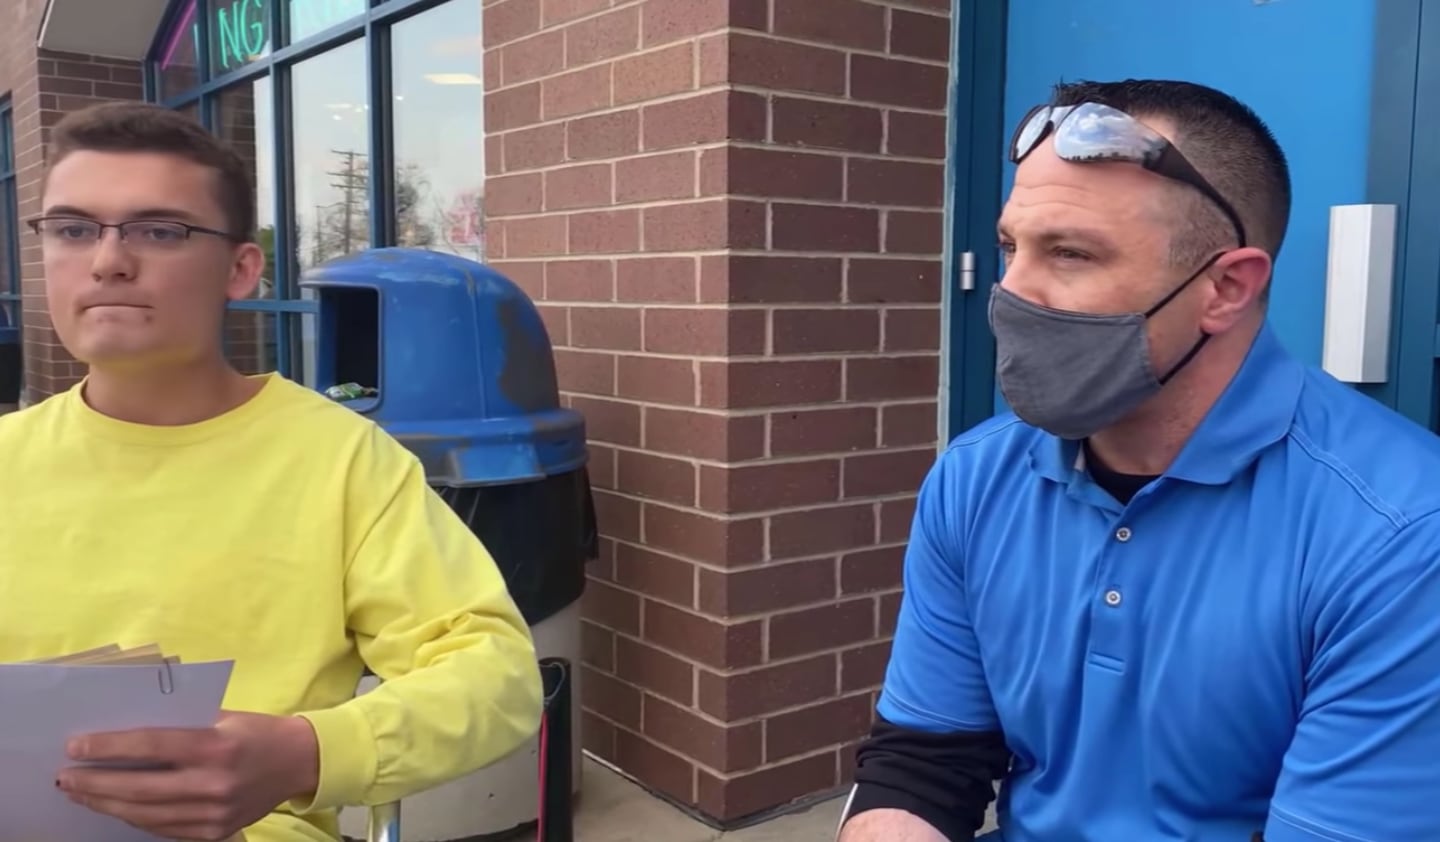 Shane Divis (left), a member of Save Our Siblings, speaking with John Resedean, in a YouTube video by the Save Our Siblings group, whose members proclaims is "committed to keeping our communities protected and safeguarding our youth."